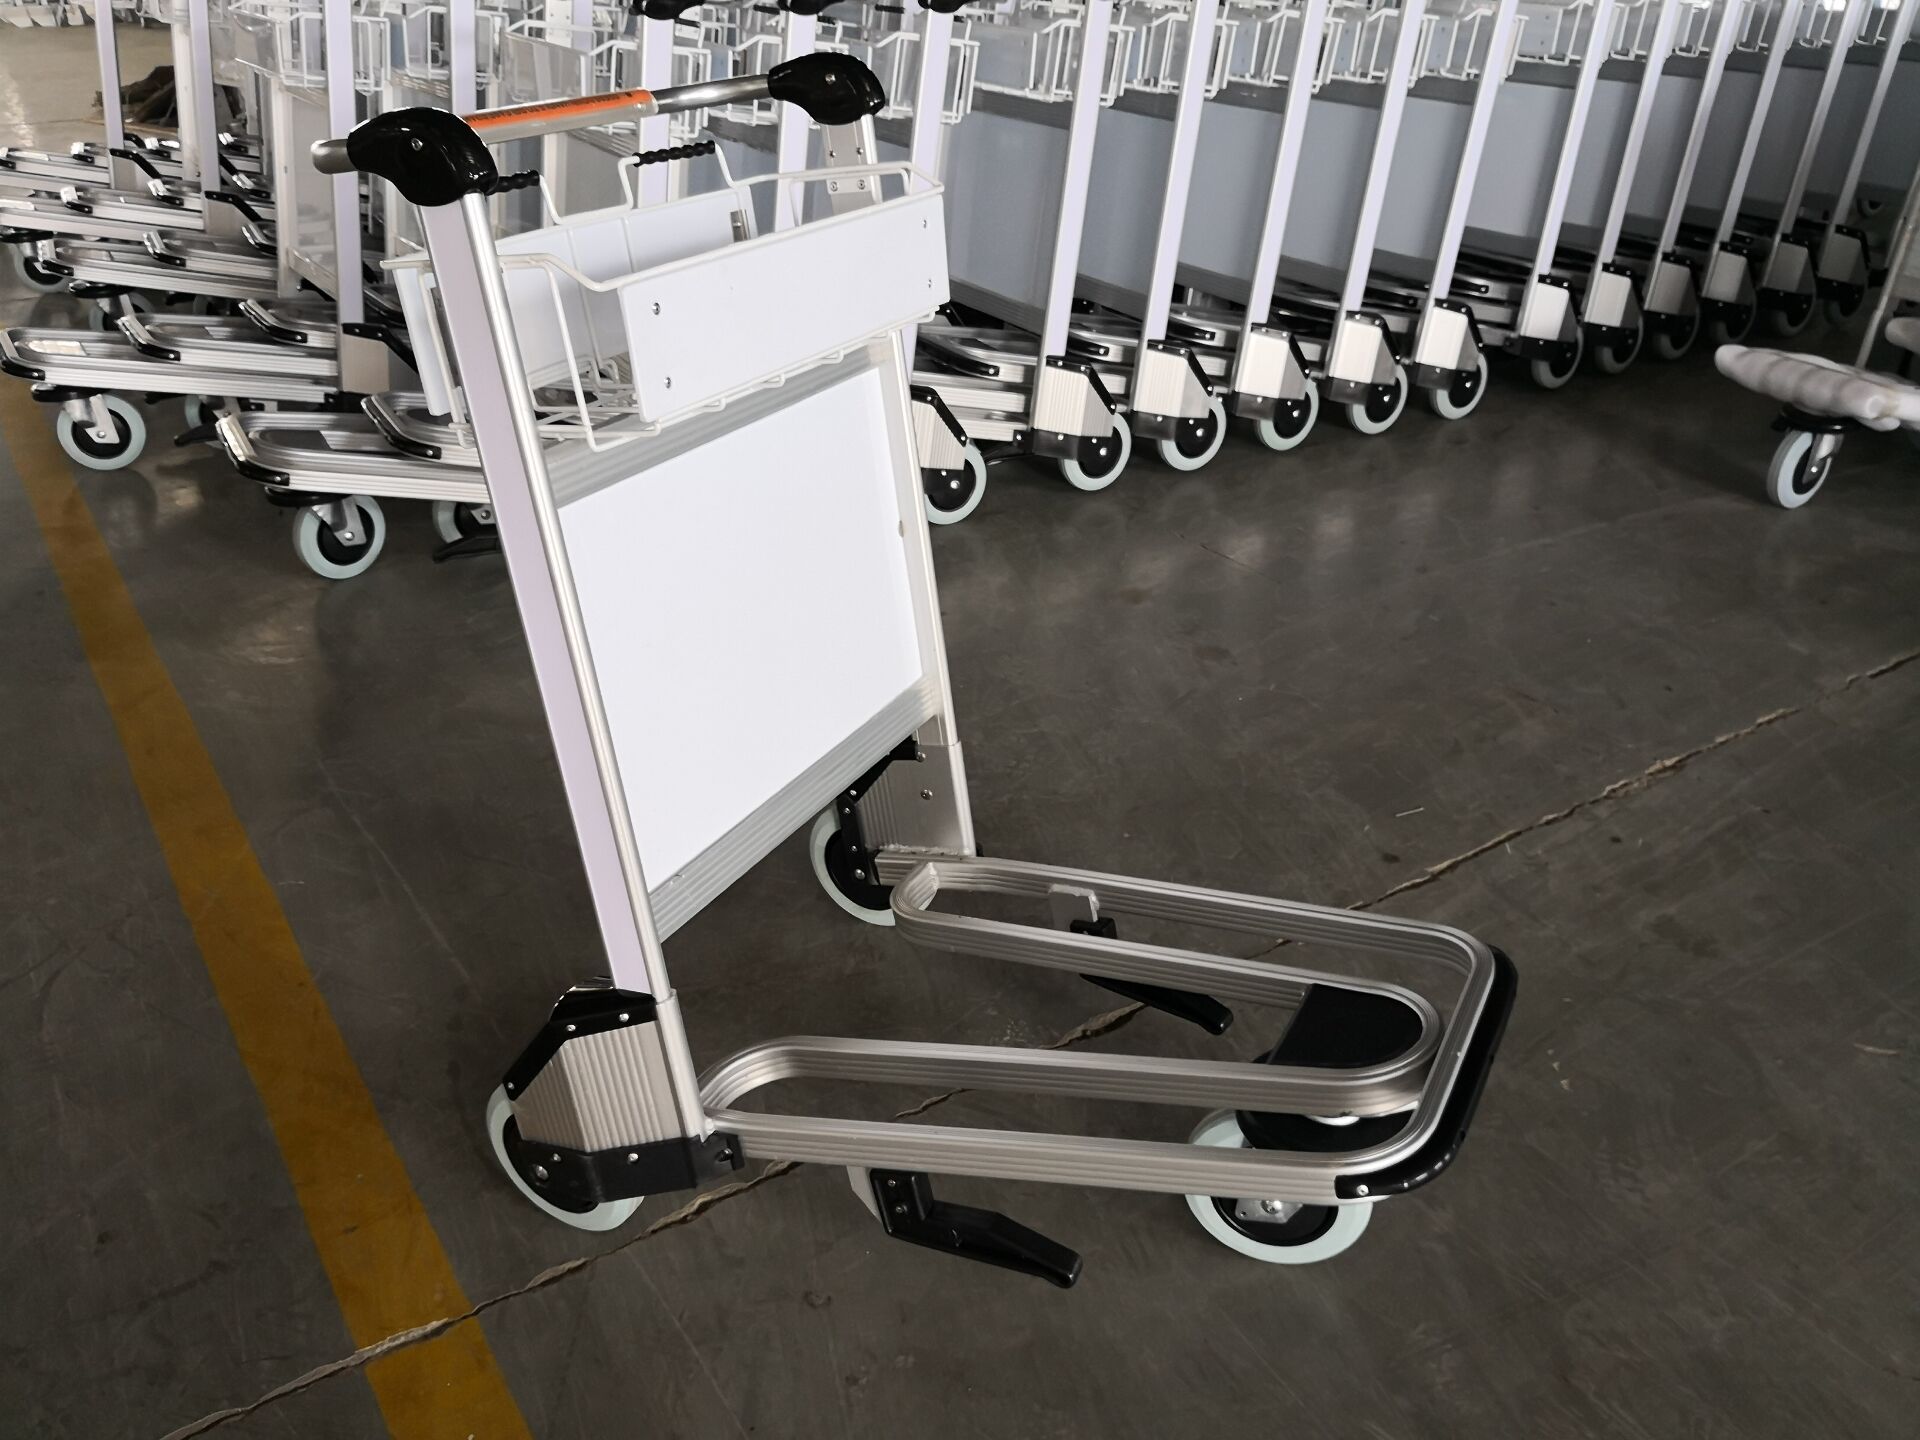 What's Airport Luggage Trolley?